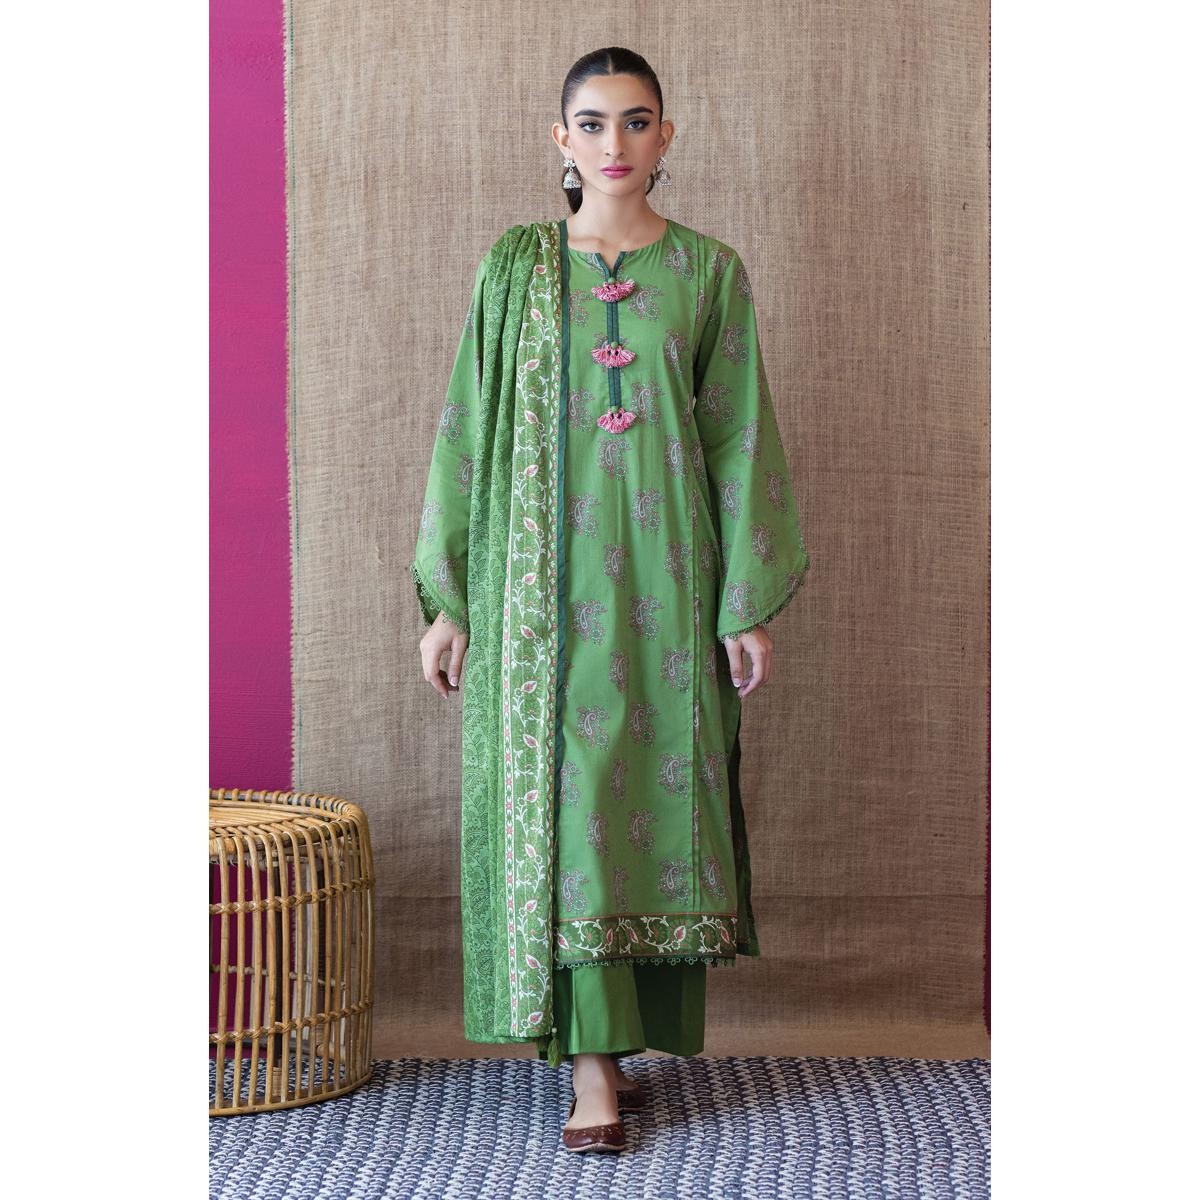 /2023/01/orient-unstitched-3-piece-suit-for-womenprinted-cambric-shirt-cambric-pant-and-lawn-dupatta-361996167_pk-1811936704-image1.jpeg